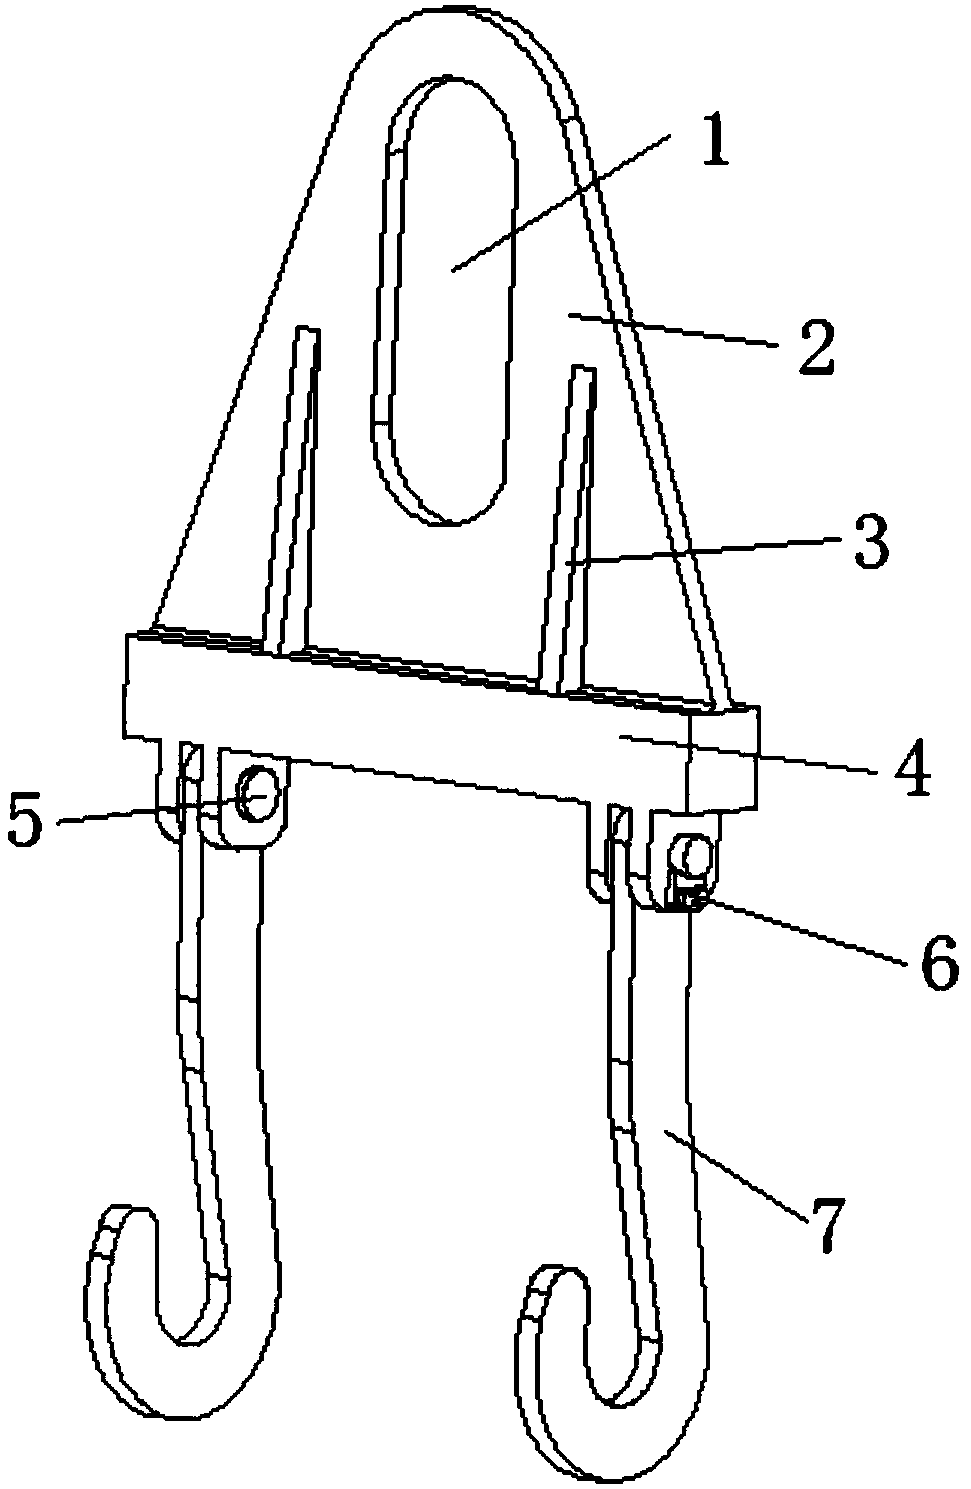 Load-lifting device for maintaining and hoisting continuous casting withdrawal and straightening machine